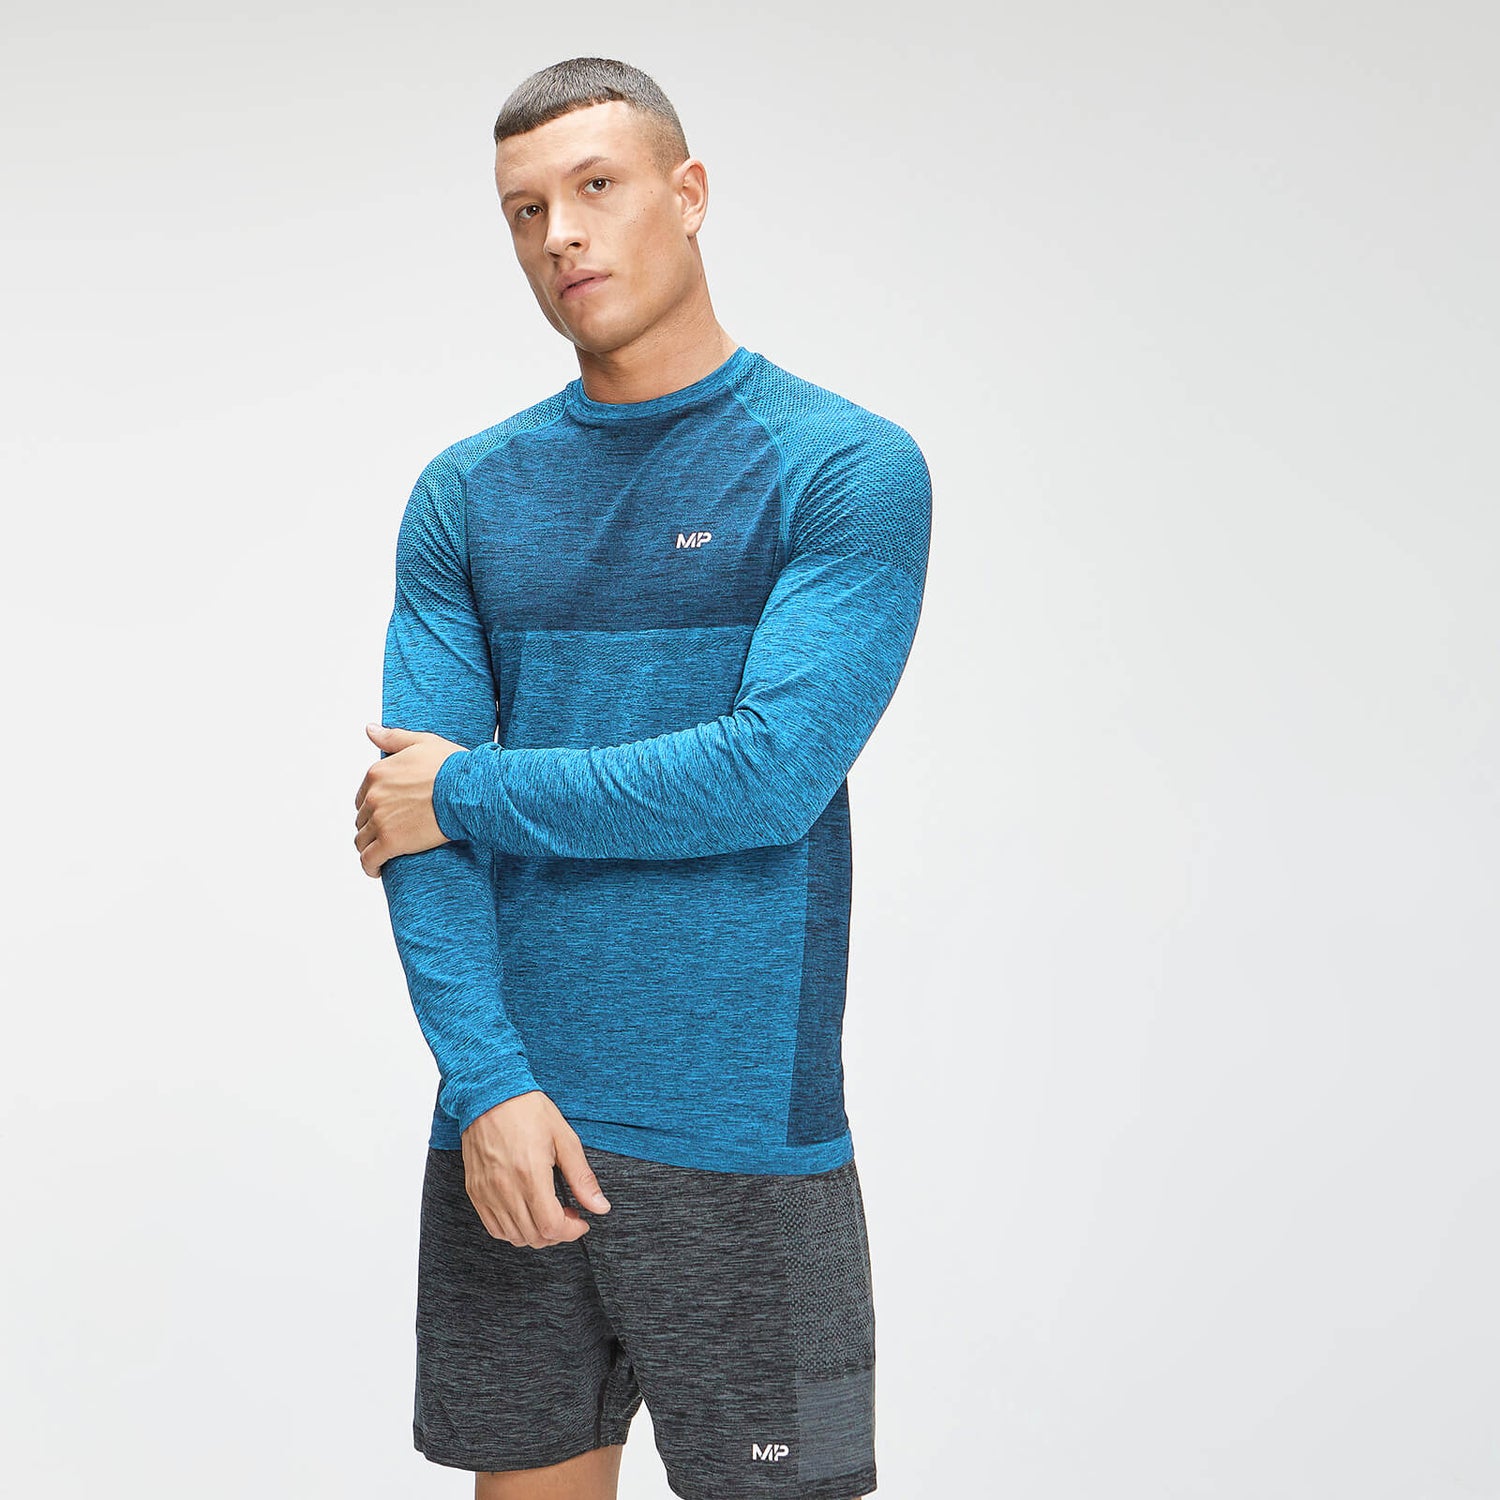 MP Men's Essential Seamless Long Sleeve Top - Bright Blue Marl - XS